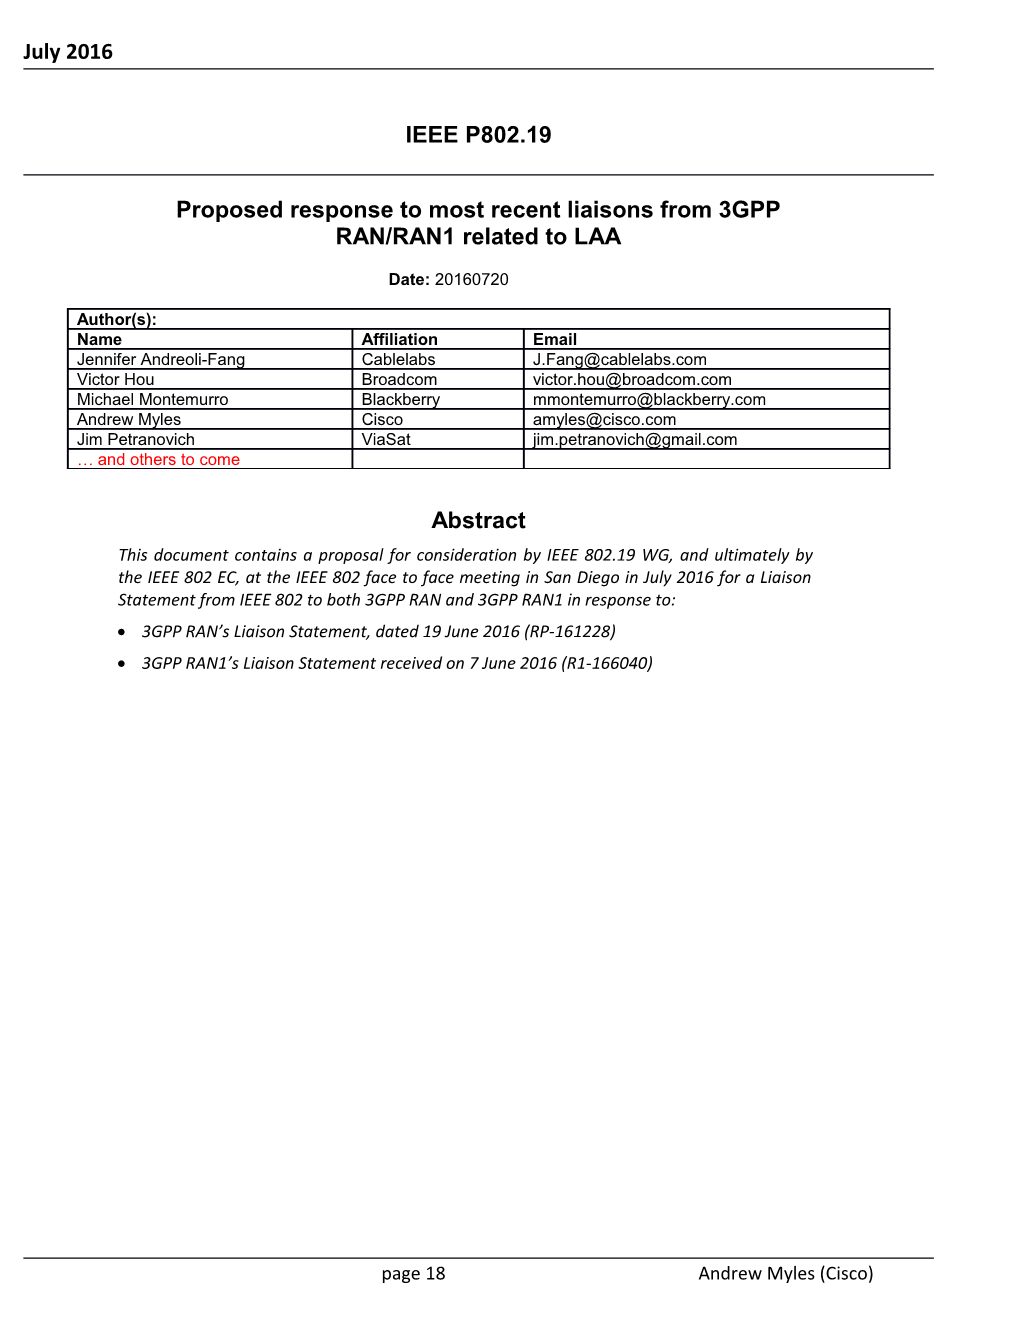 Proposed Response to Most Recent Liaisons from 3GPP RAN/RAN1 Related to LAA